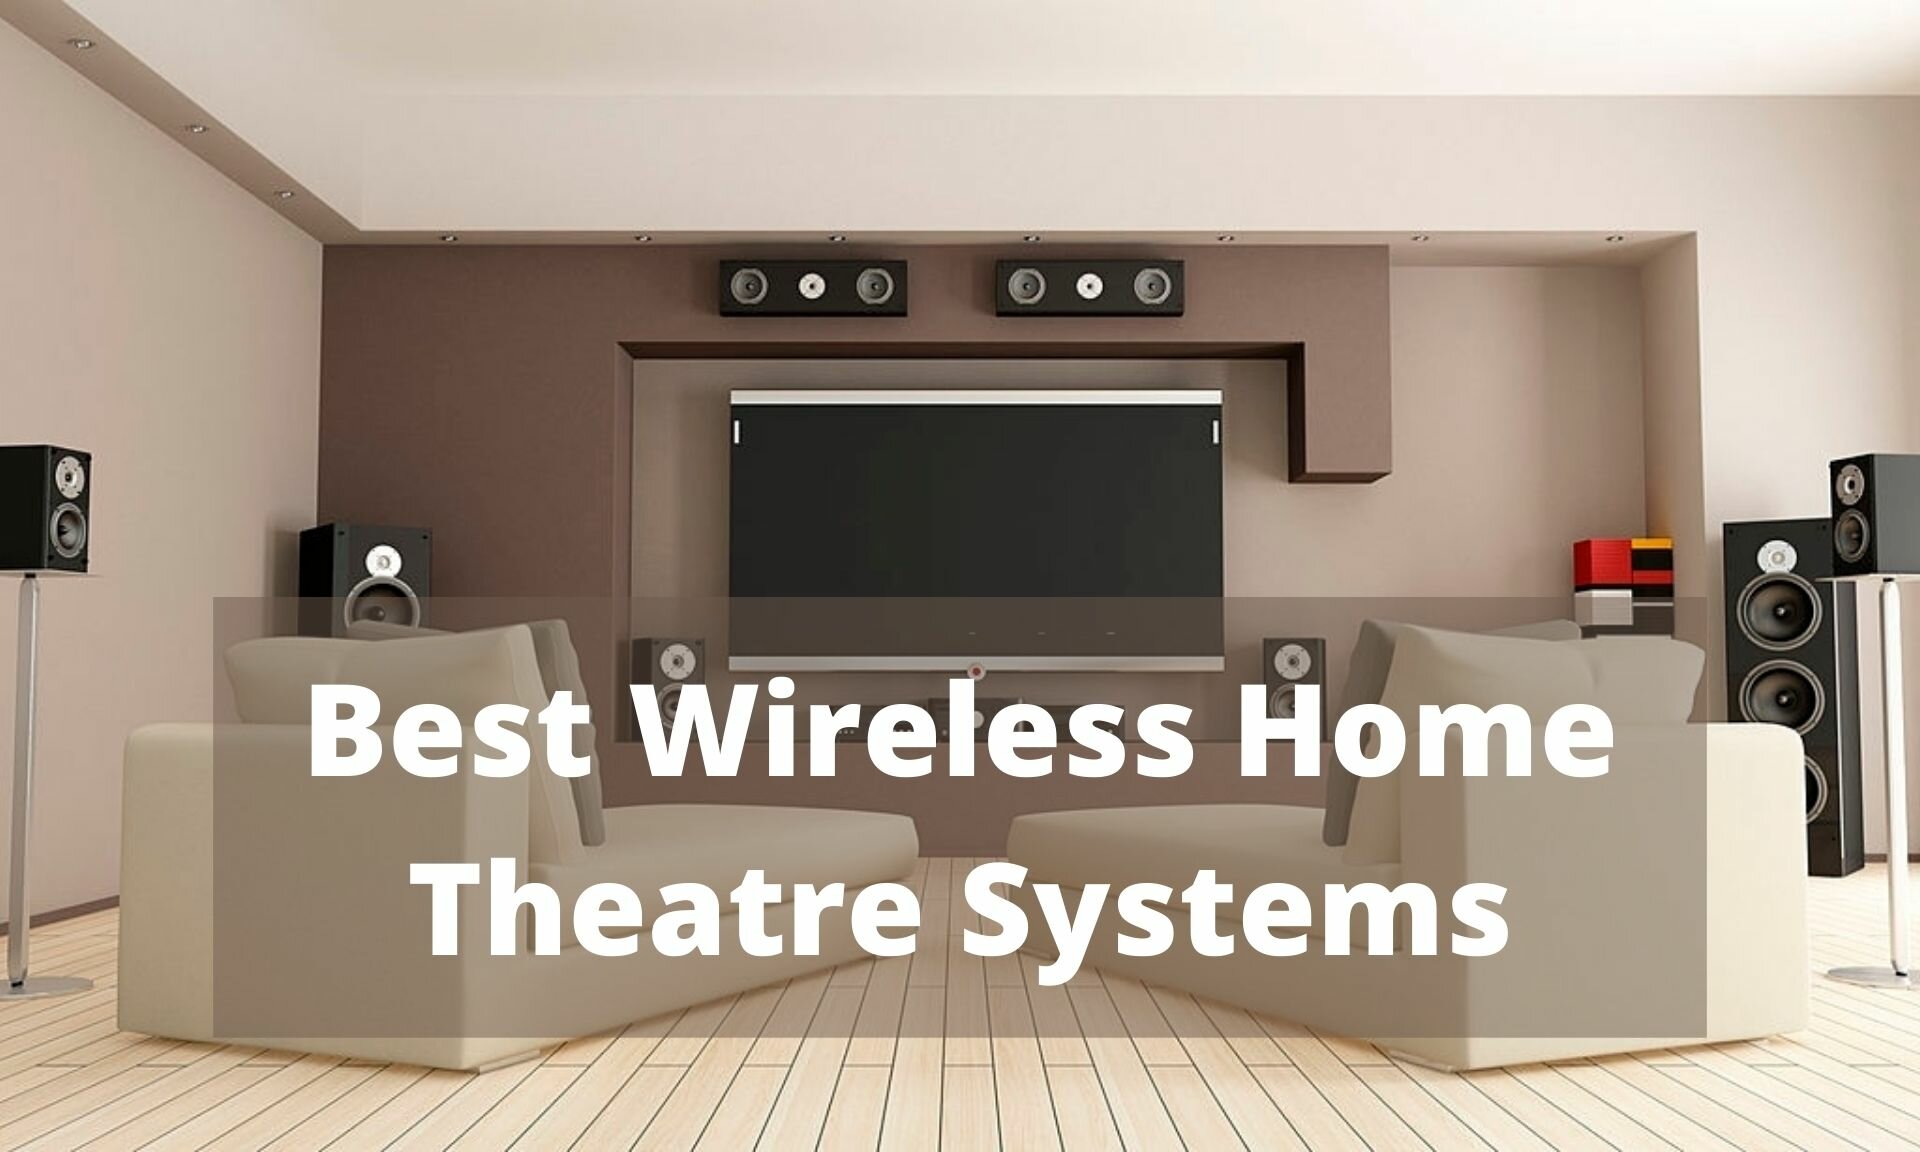 Best Wireless Home Theatre Systems